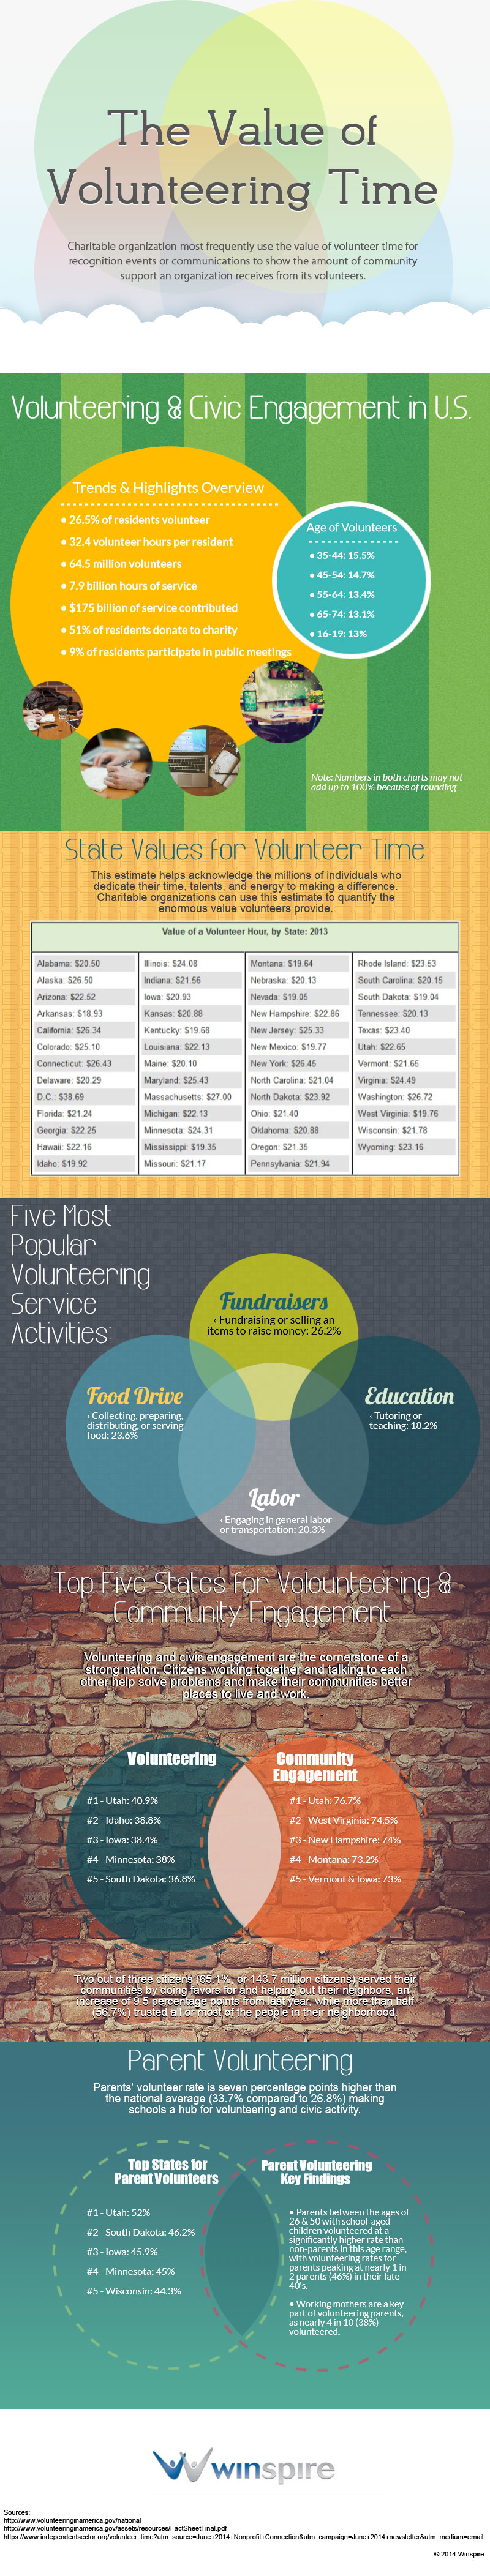 The Value of Volunteering Time - Winspire Infographic 